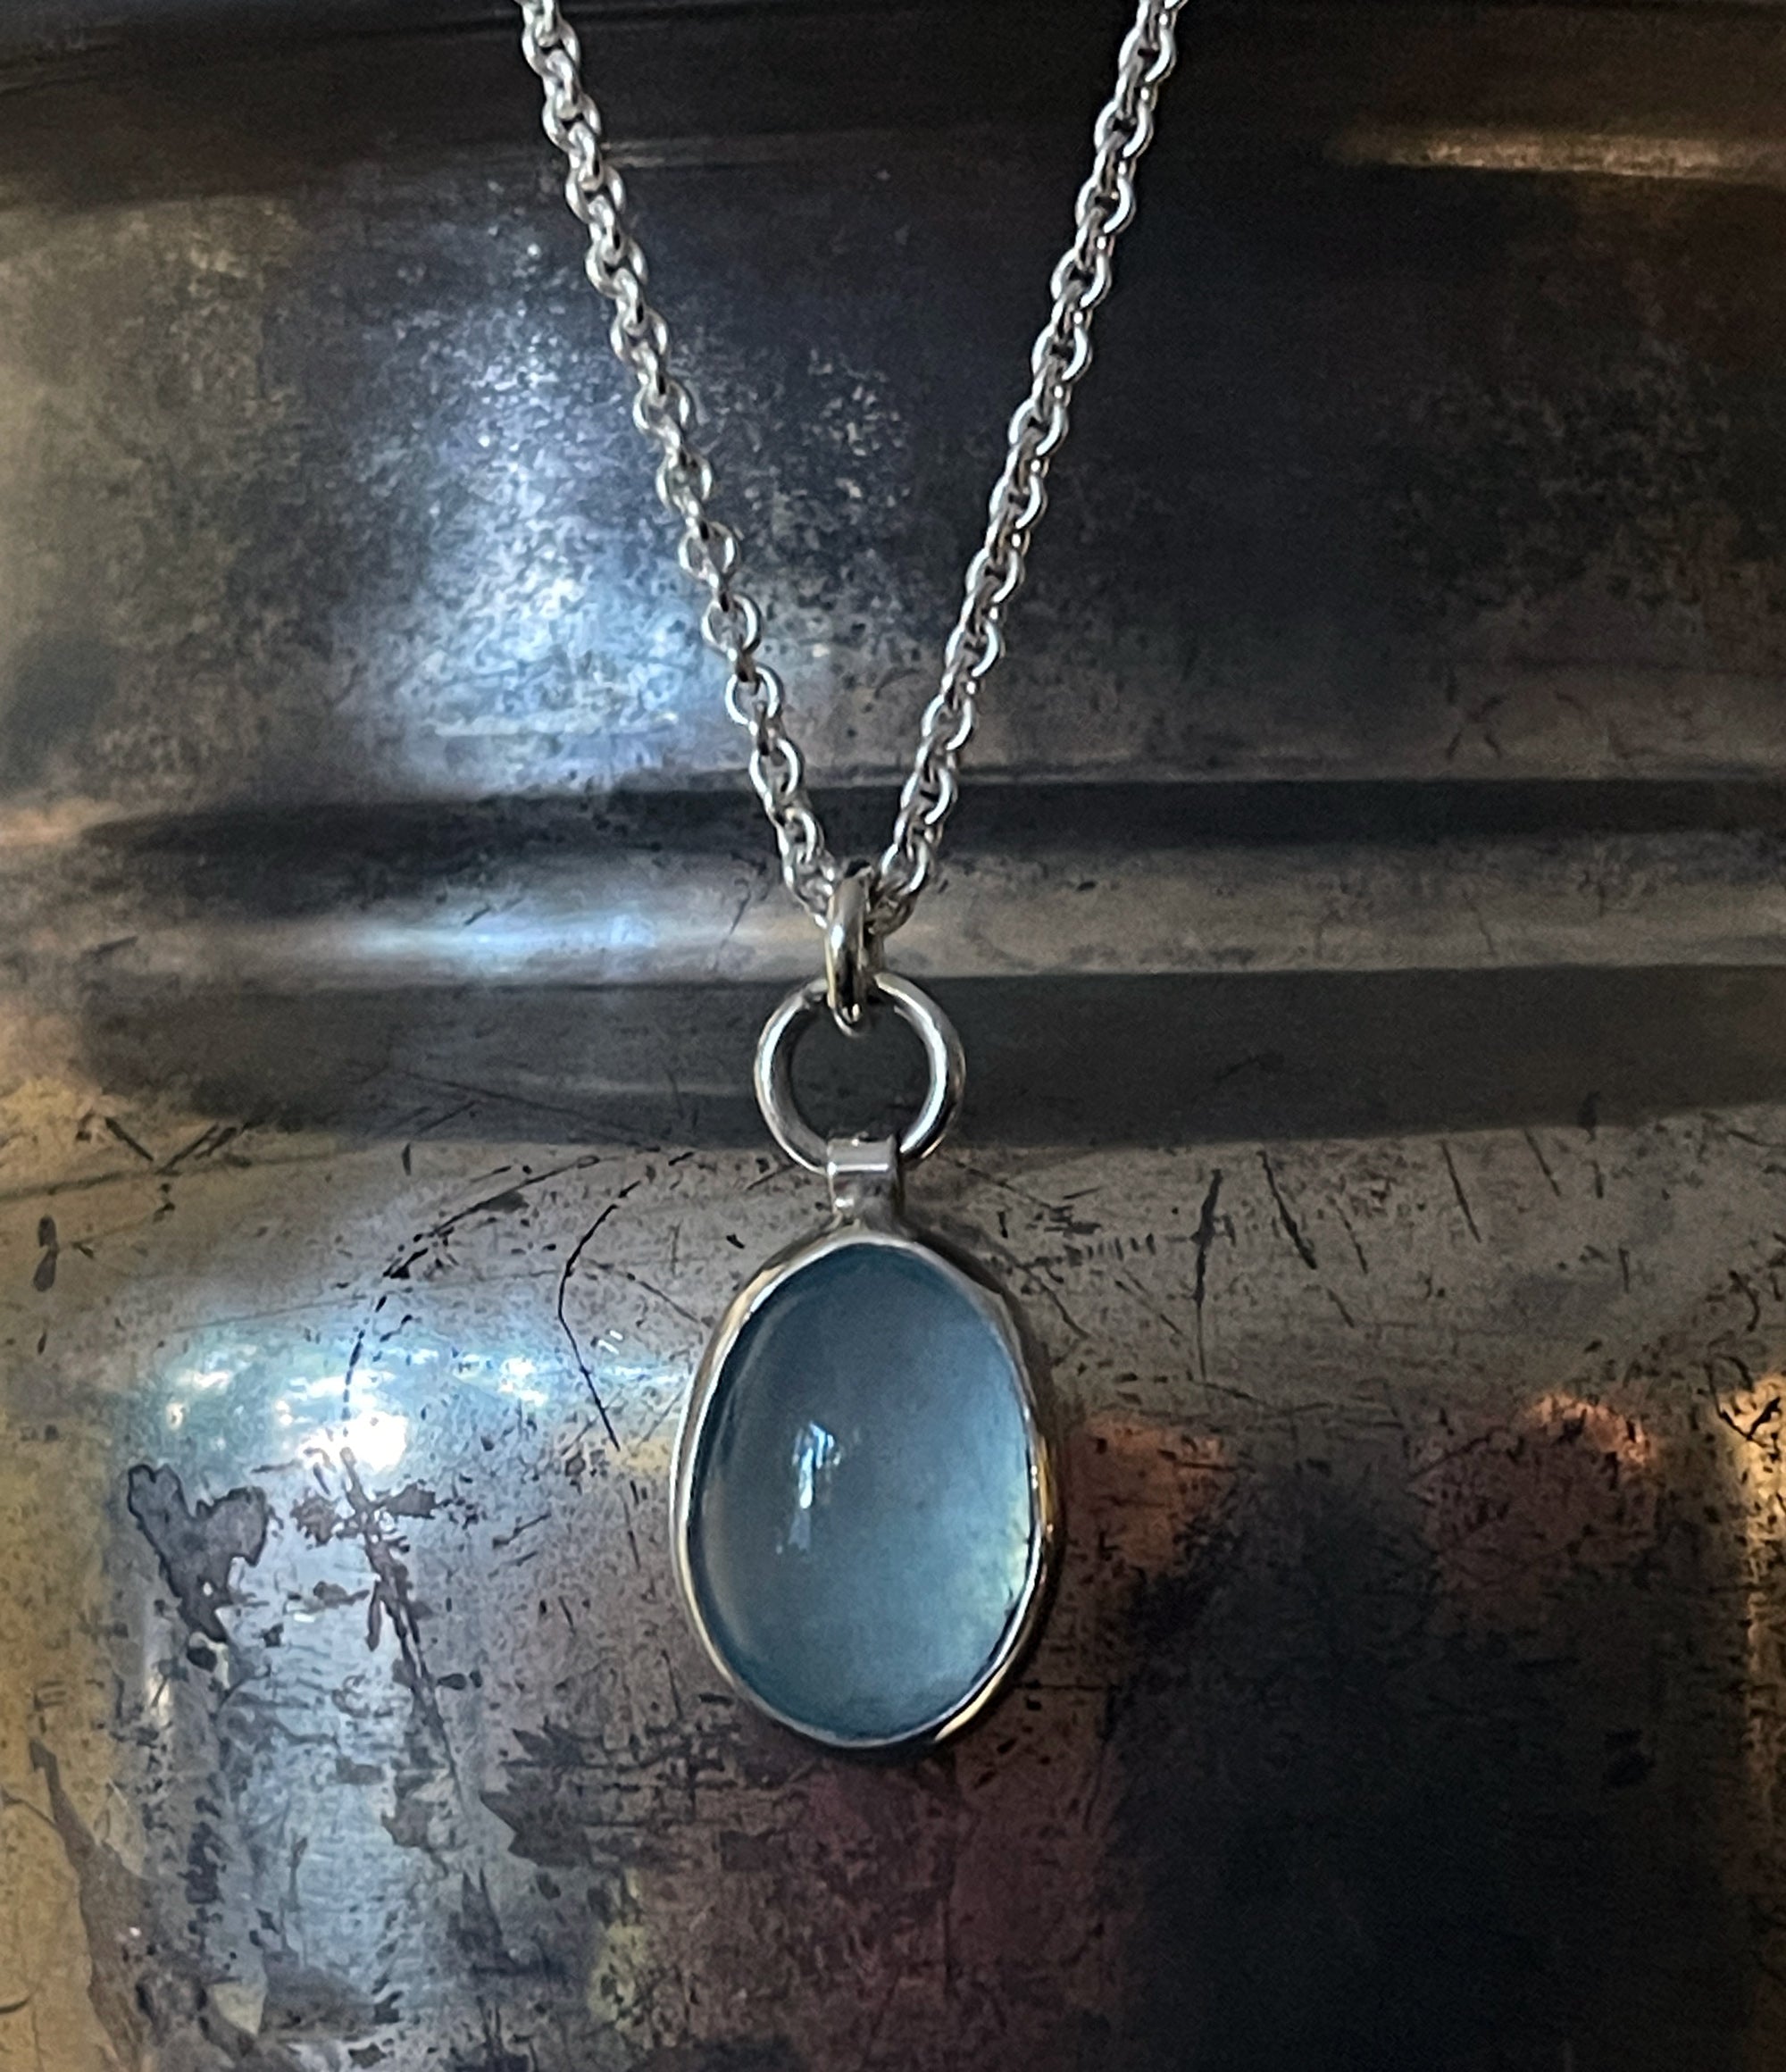 Aquamarine Necklace in Sterling Silver, Oval Aquamarine Pendant, Blue Gemstone Necklace, March Birthday